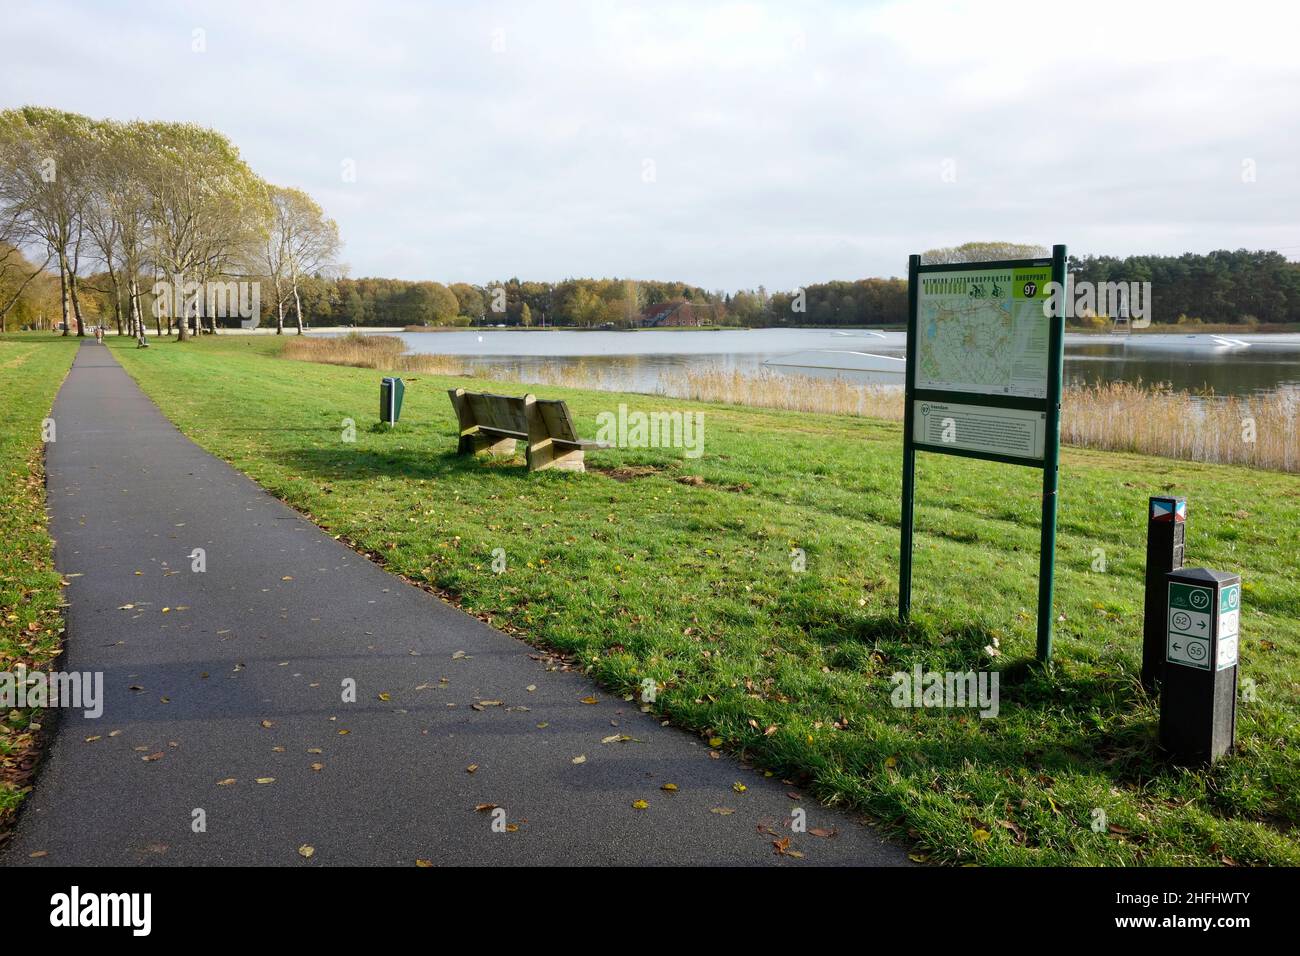 The Borgerswold park in Veendam, The Netherlands. Stock Photo